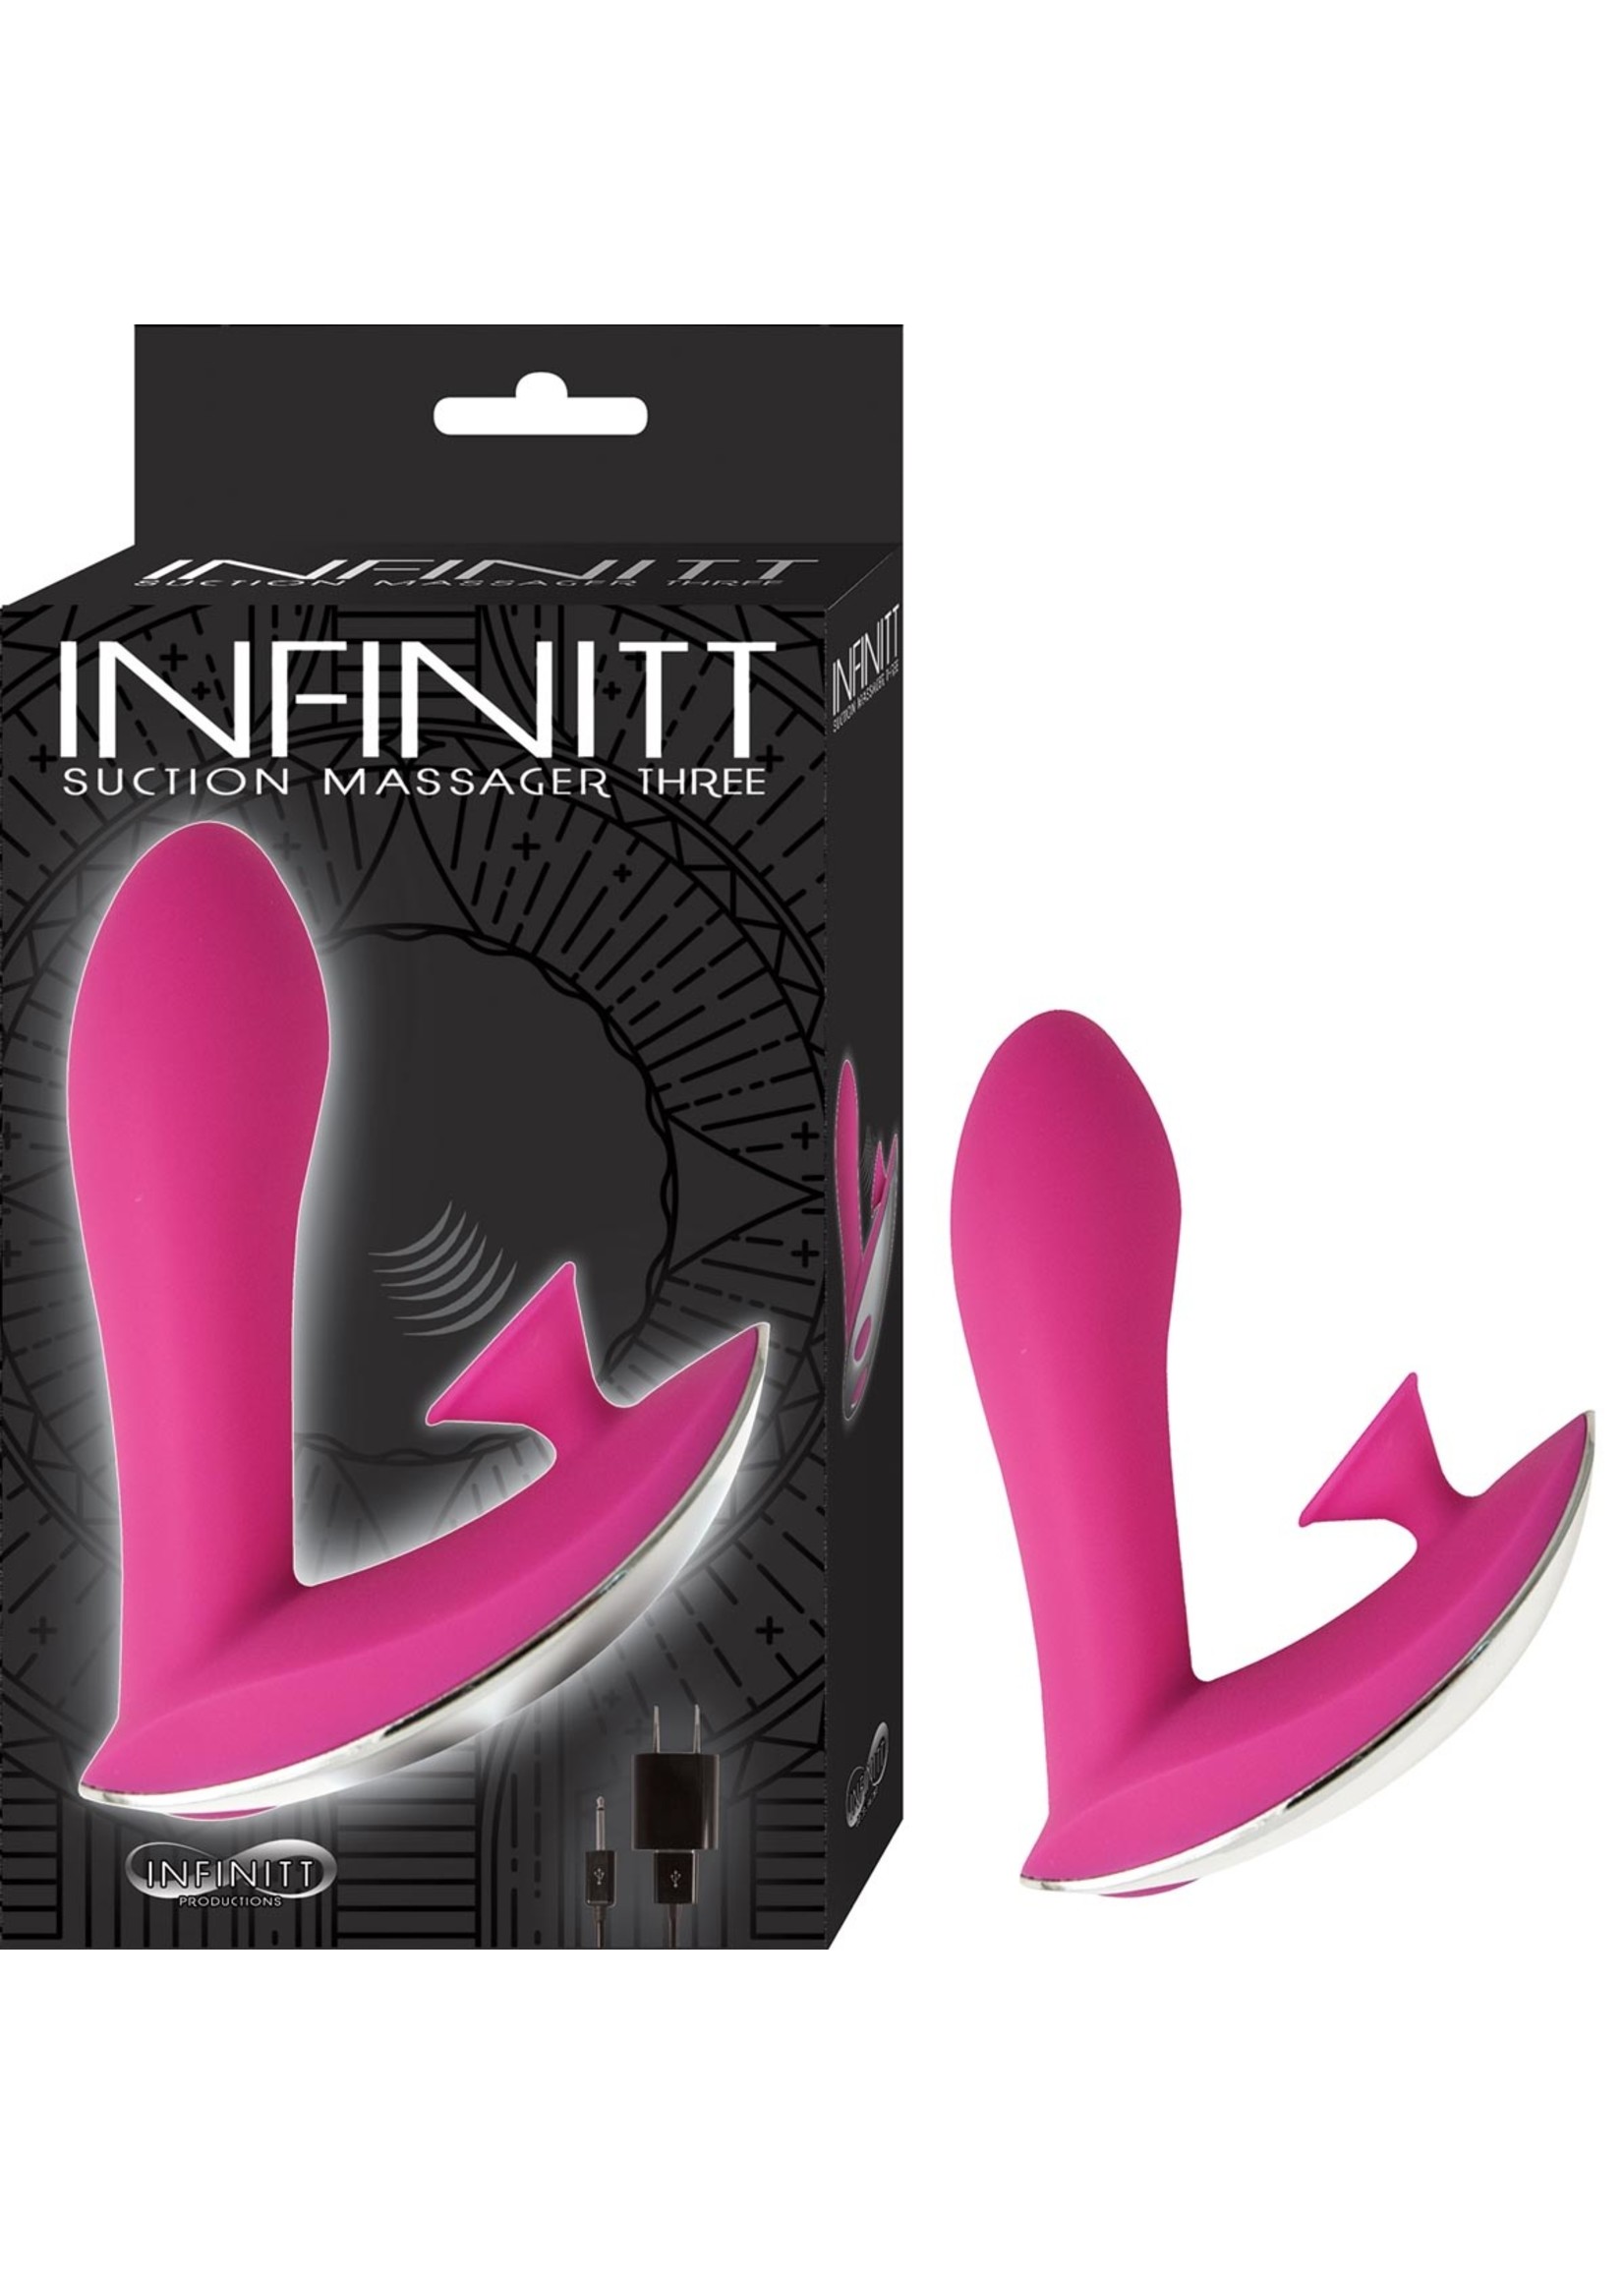 Nasstoys Infinitt Suction Massager Three Rechargeable Silicone Vibrator - Pink